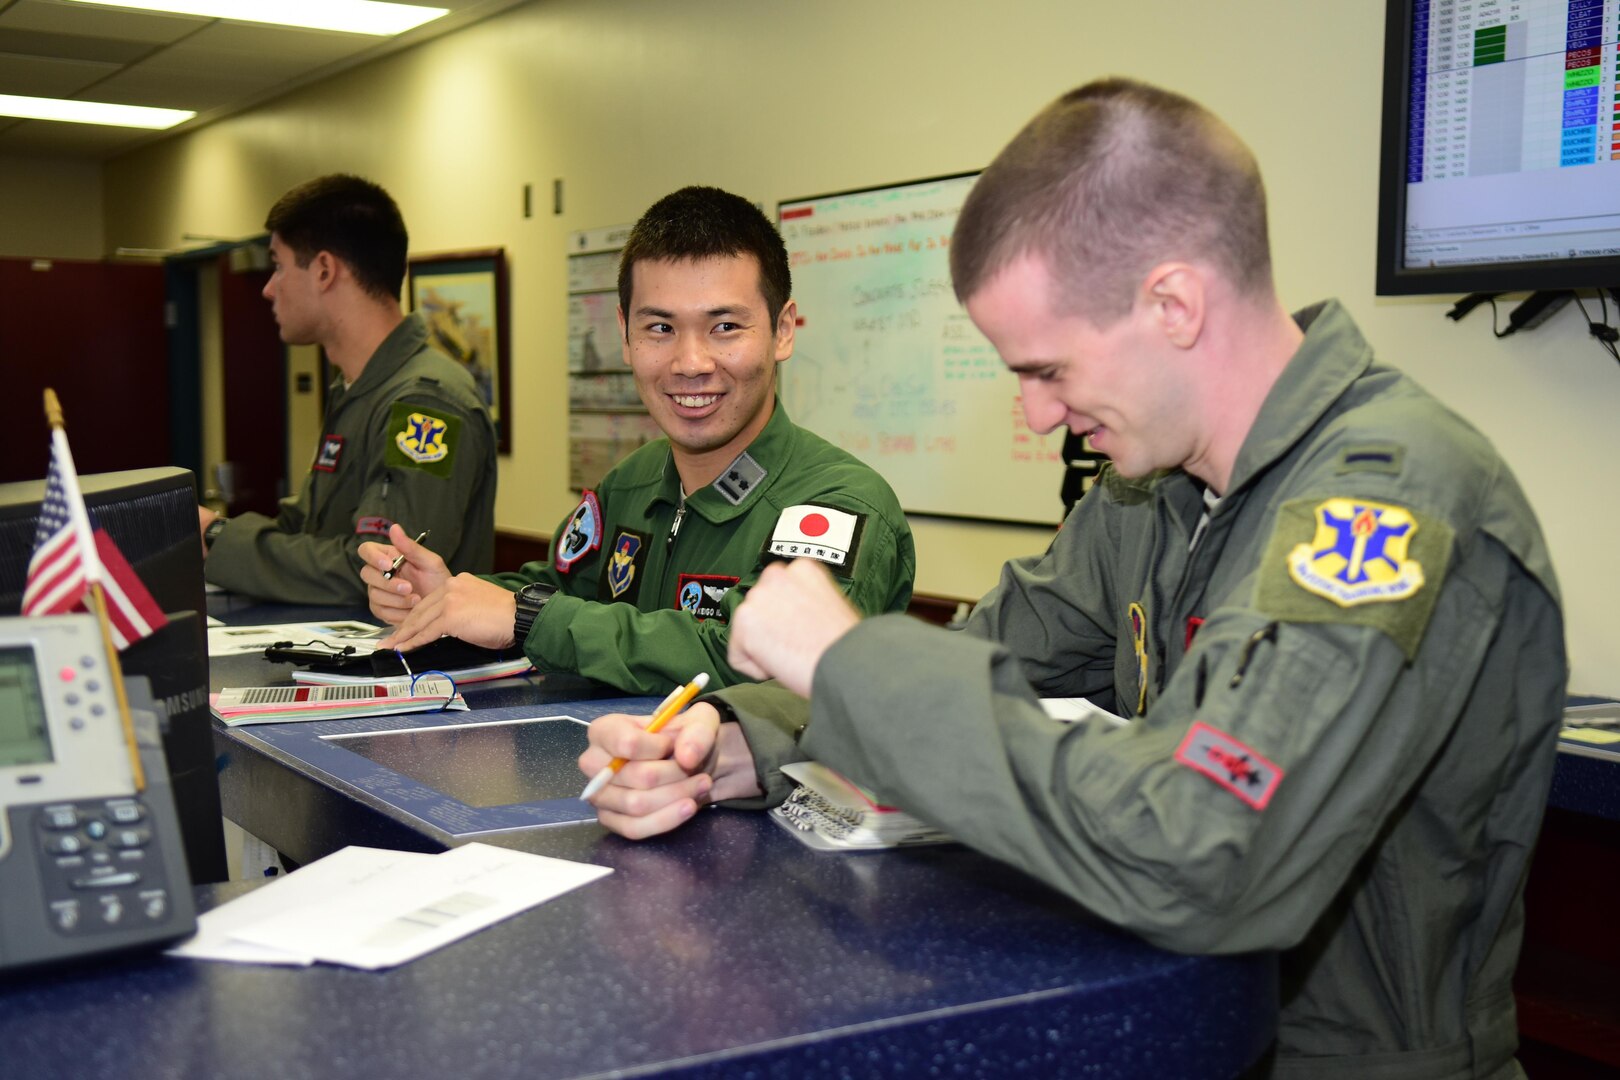 Caring for international officers